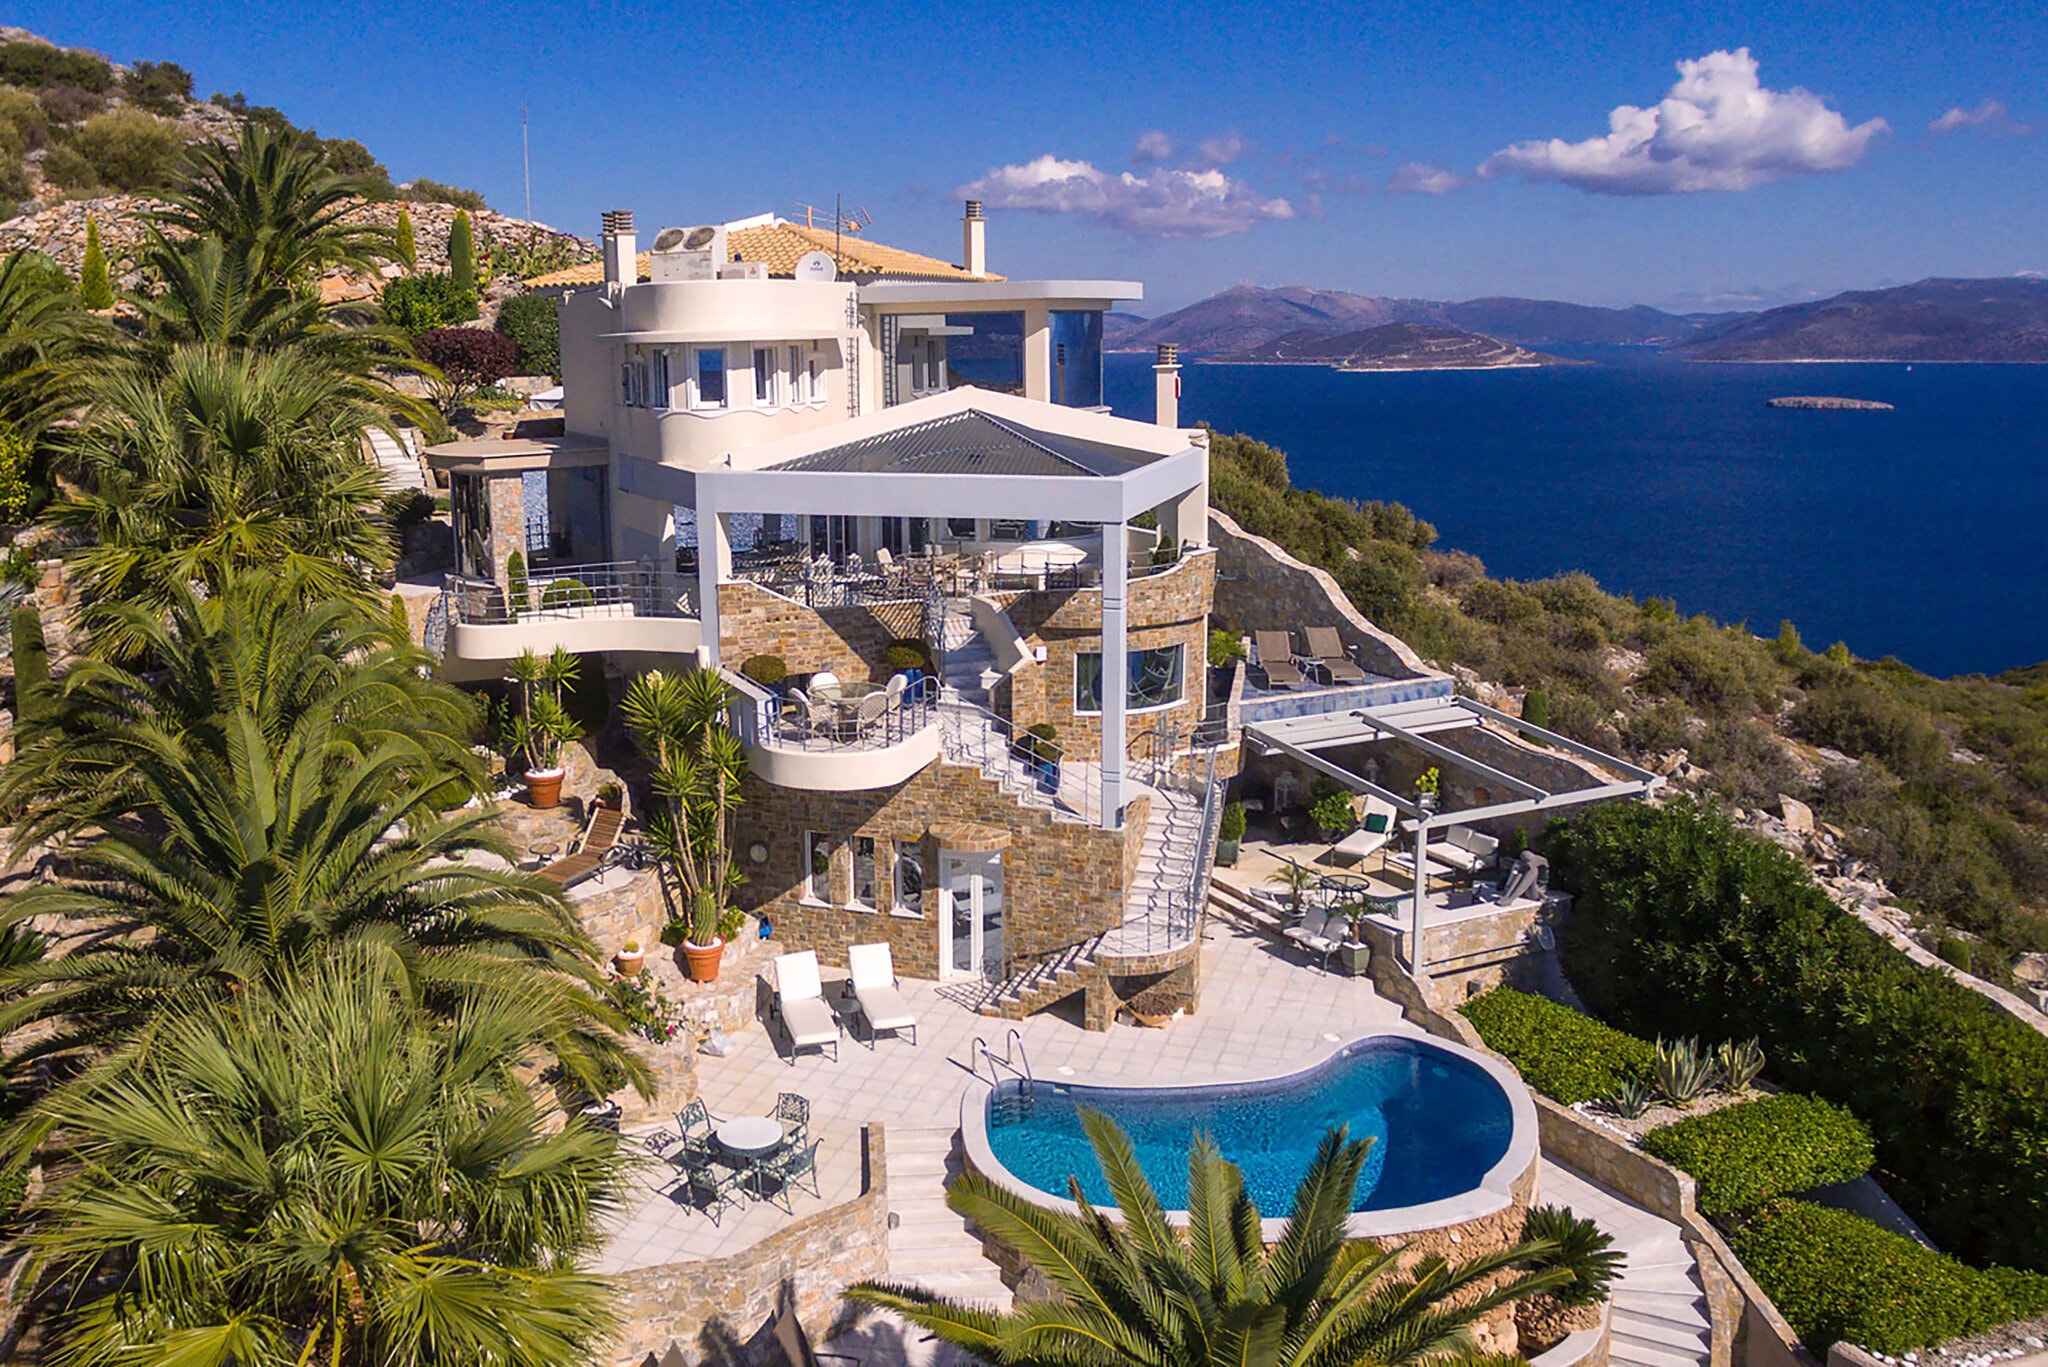 New York Times: Refueled interest of foreign investors in Greek real estate